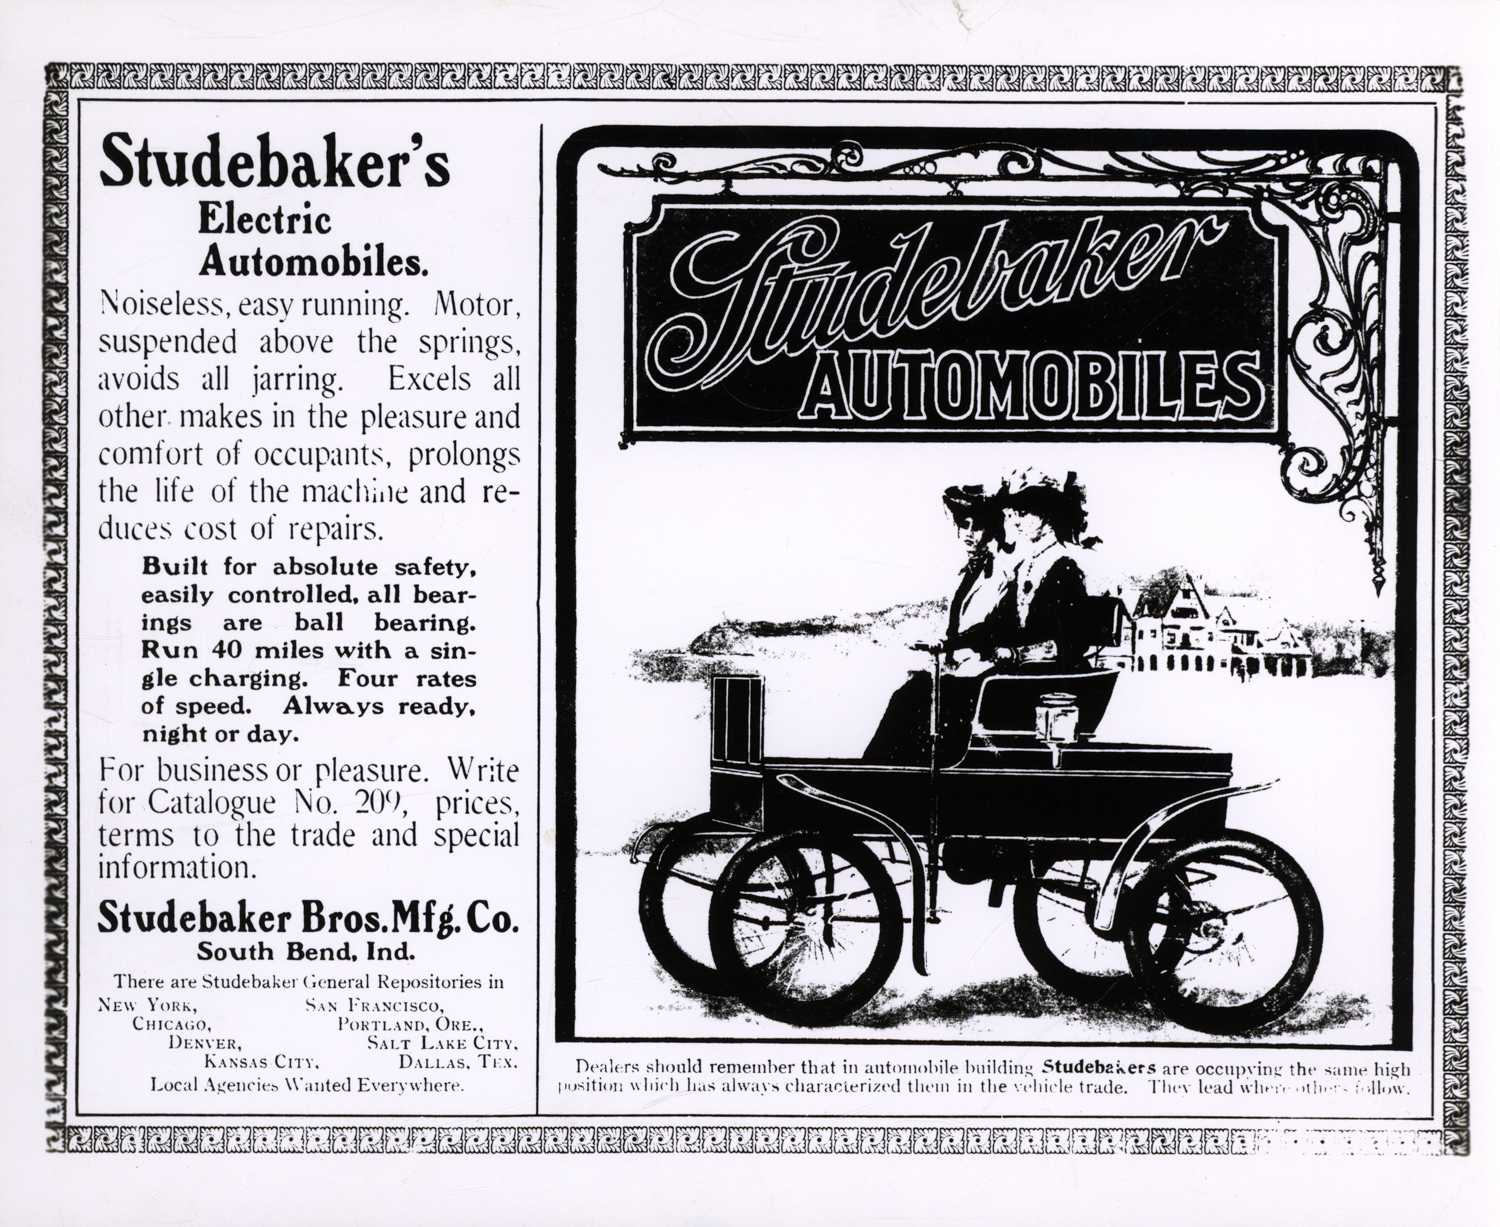 Studebaker's first automobiles were electrics - fairly basic but very reliable. 